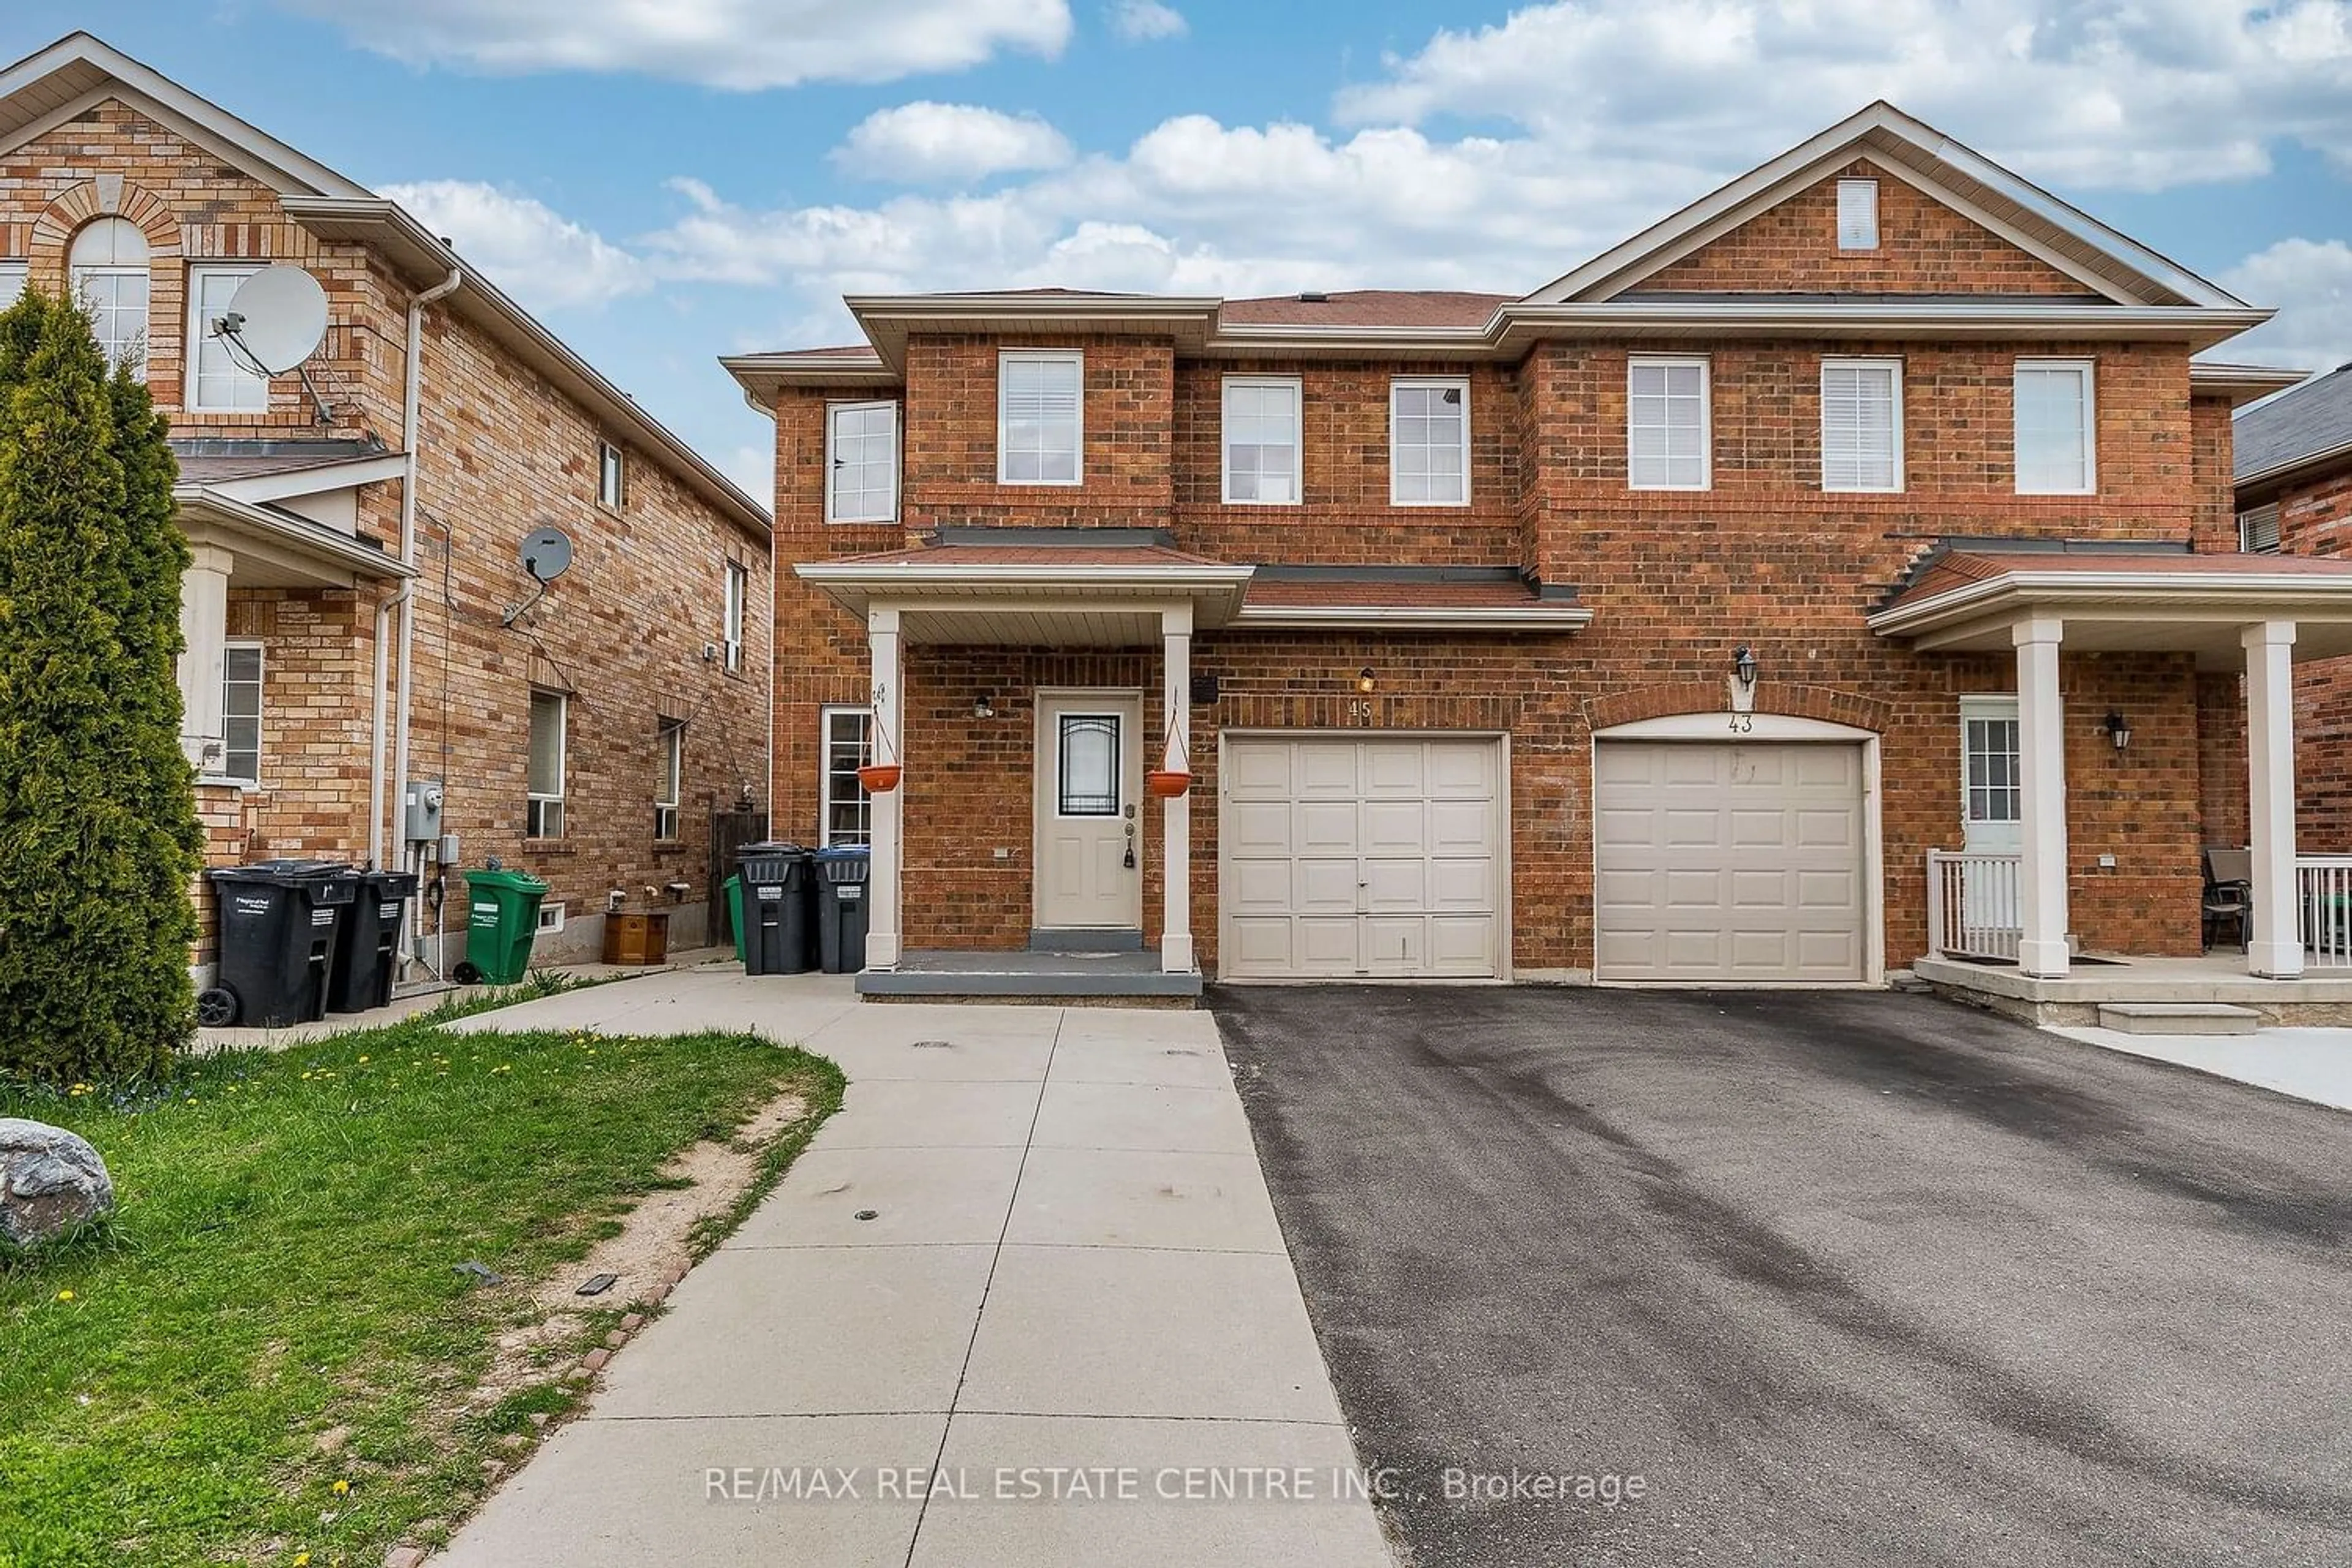 Home with brick exterior material for 45 Commodore Dr, Brampton Ontario L6X 0S6